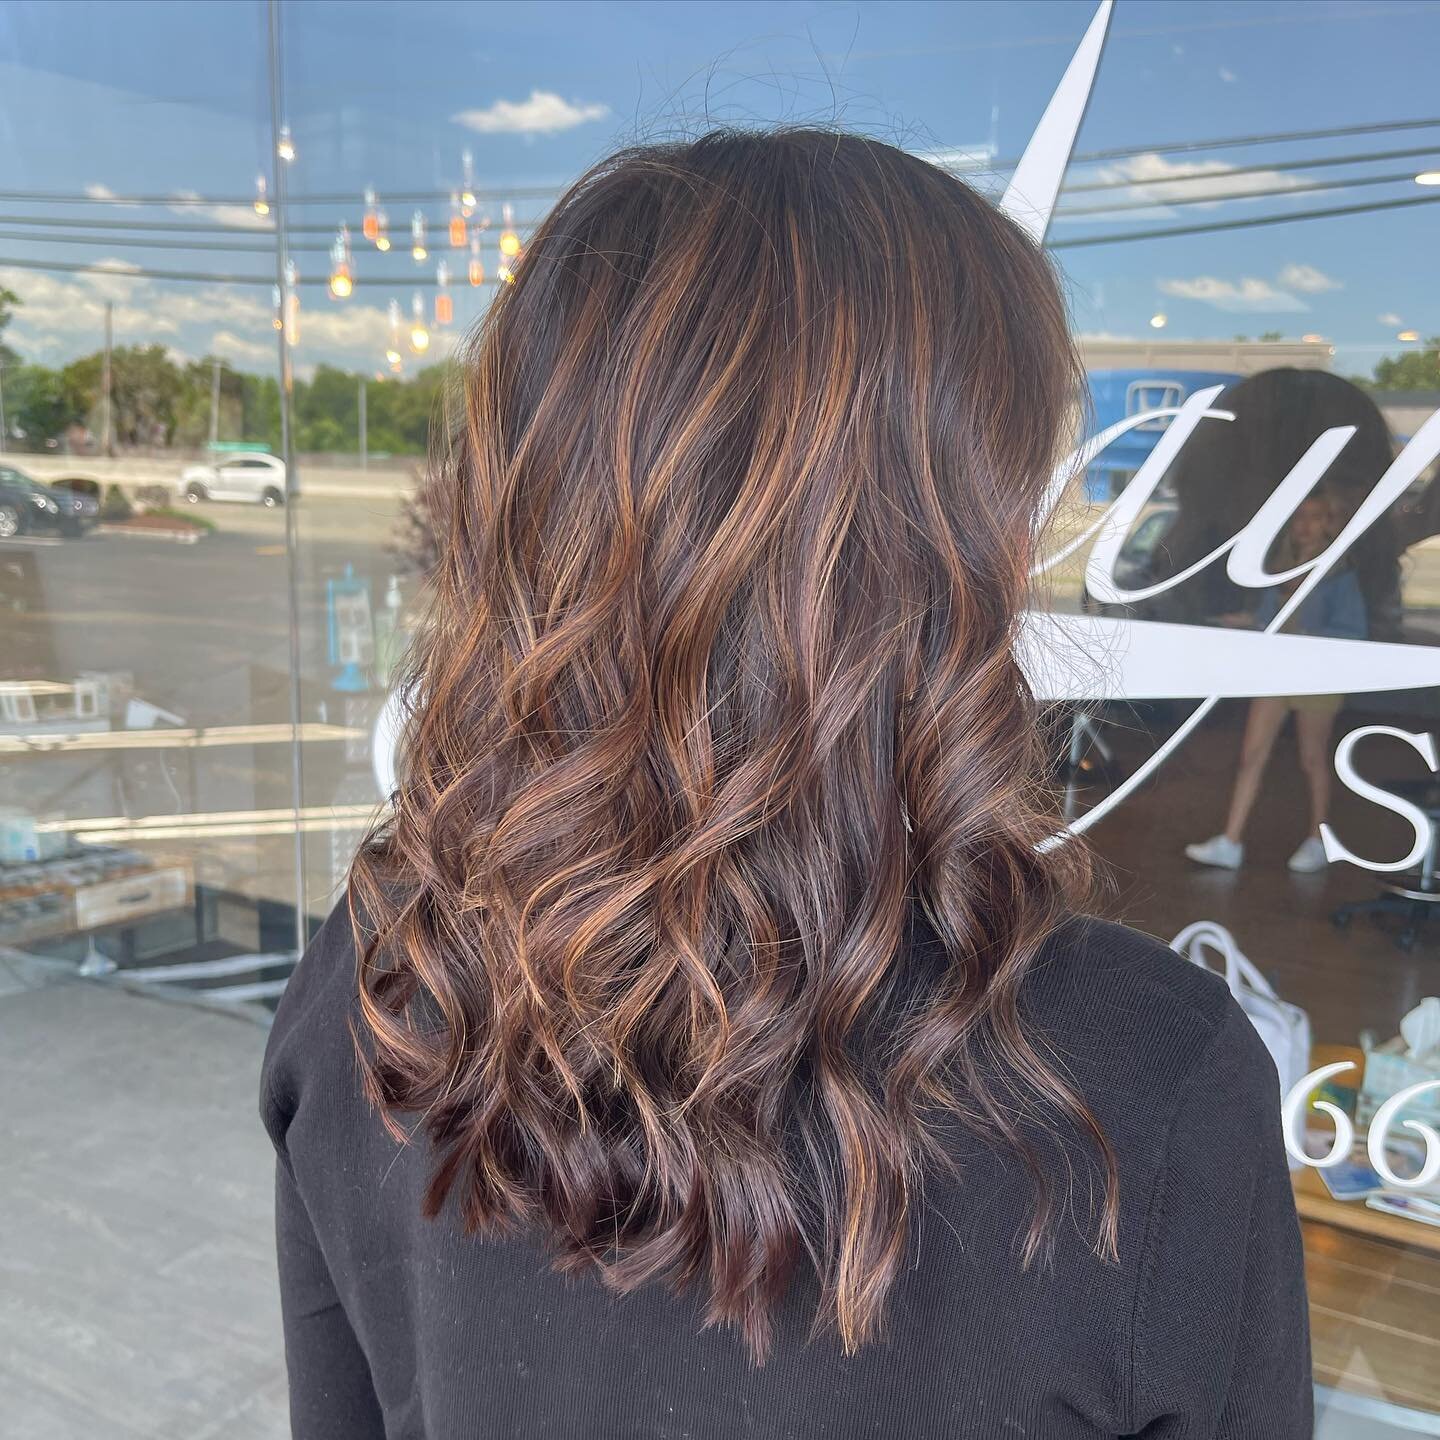 &ldquo;I always feel good after I change my hair!&rdquo; ❤️
Amazing color done by Sarah! @styles.bysarah 
.
.
.
.
.
.
.
.
.
.
.
.
.
.
.

#highlights #fresh #bright #blend #colorist #lincolnpark  #lincolnparkhairdreser #lincolnparkstylist #morriscount